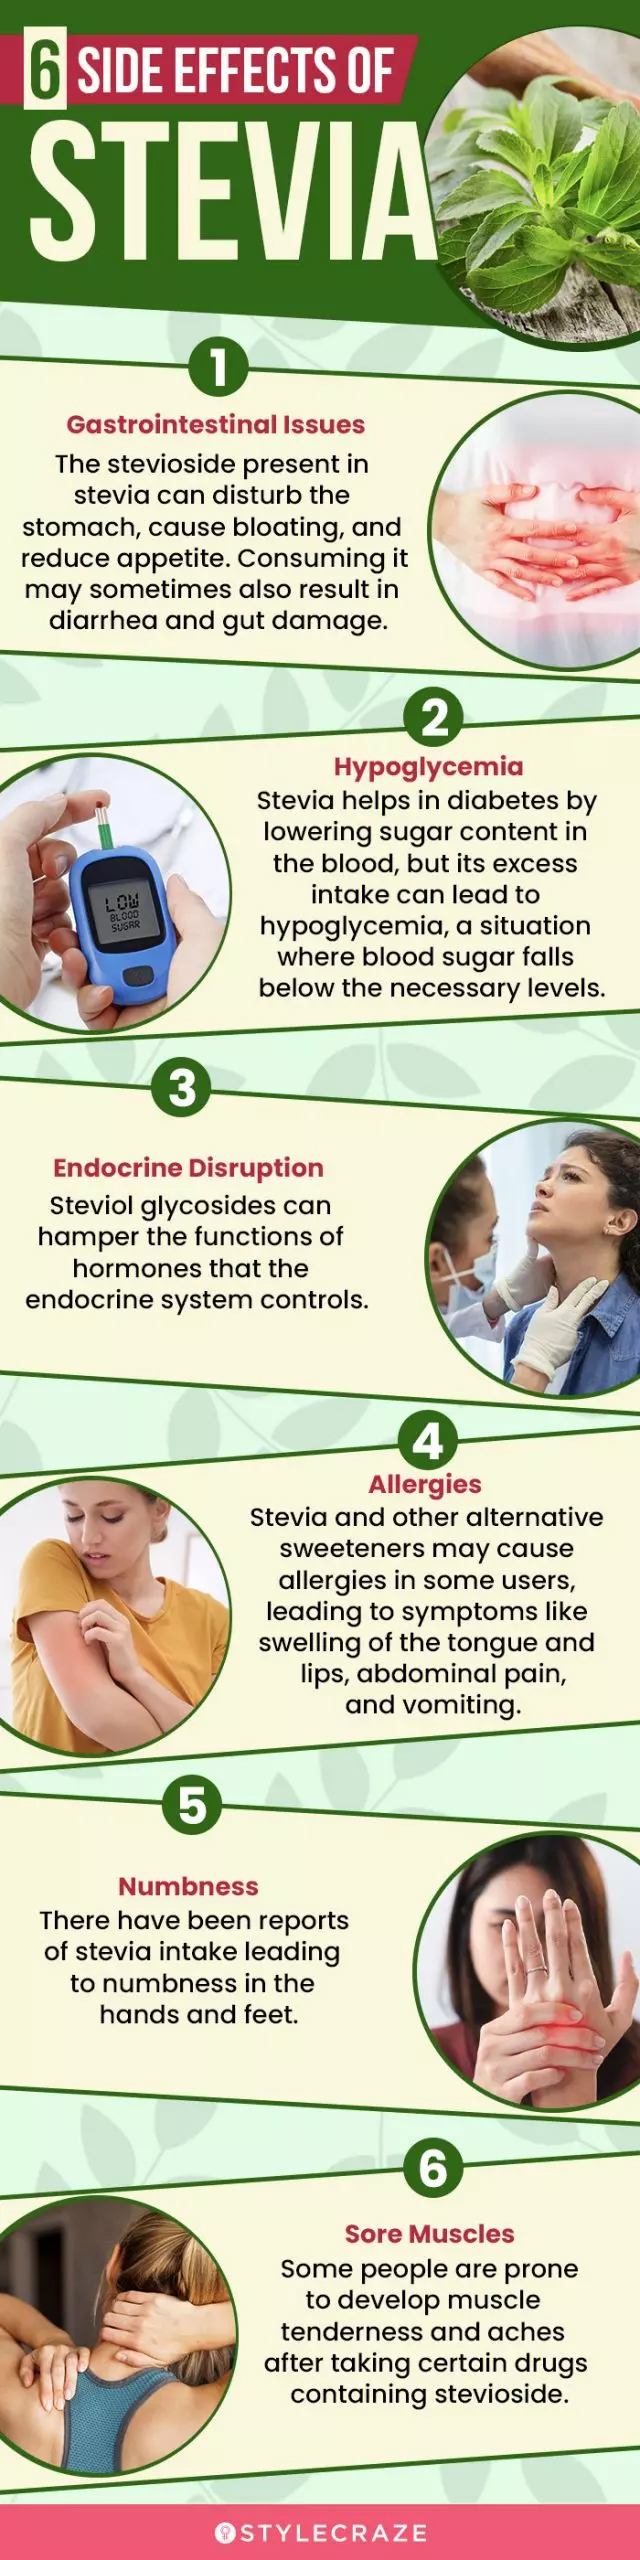 serious side effects of stevia (infographic)